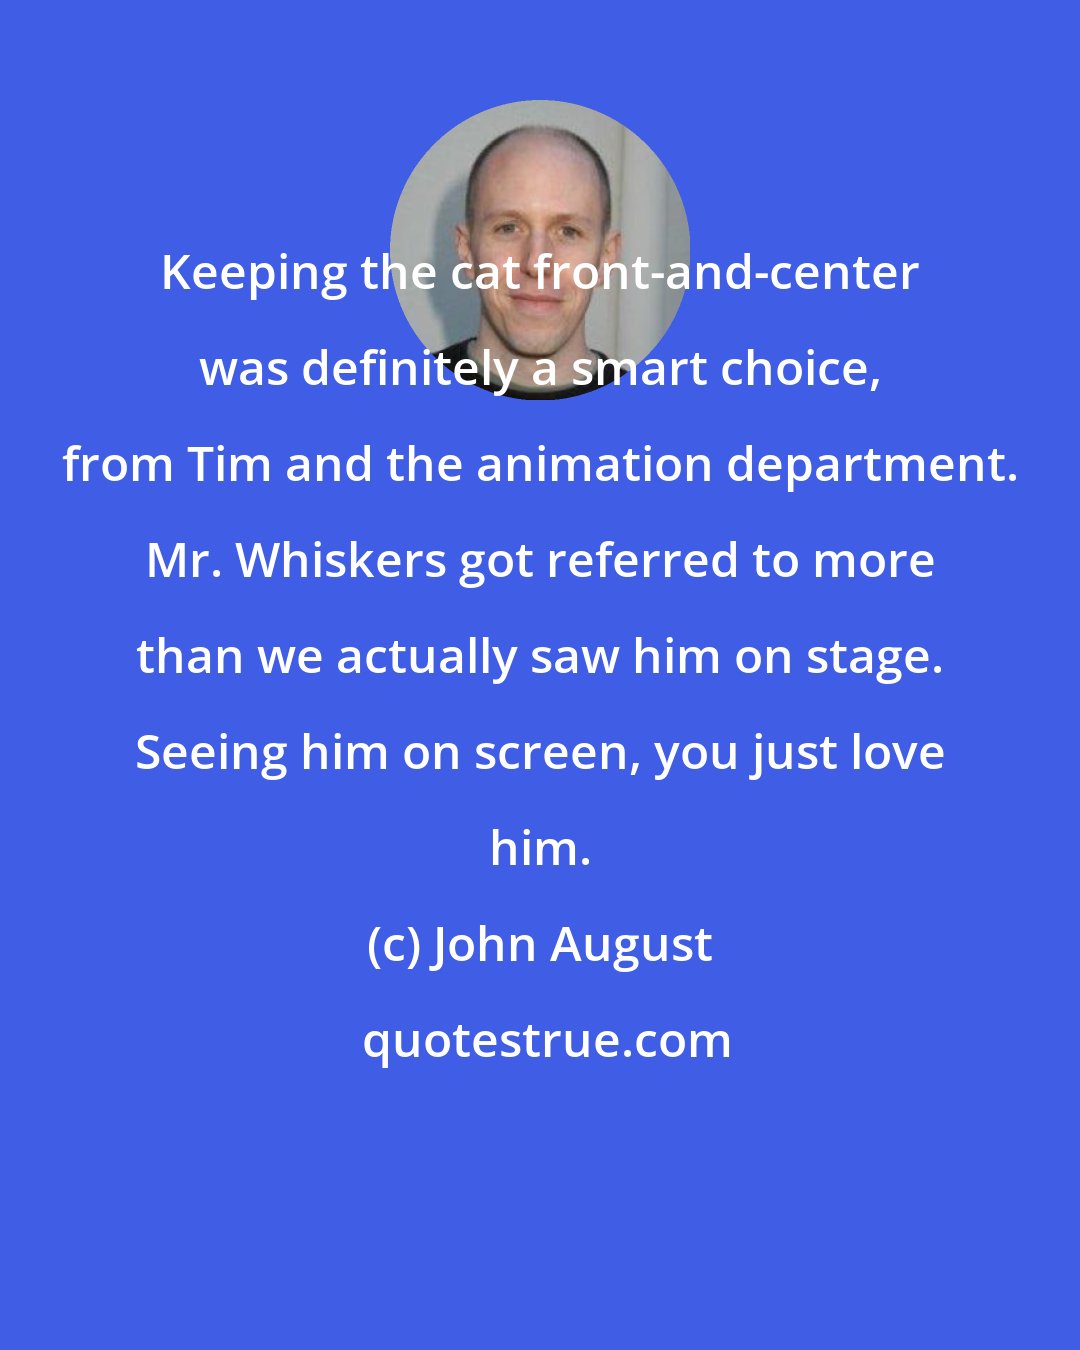 John August: Keeping the cat front-and-center was definitely a smart choice, from Tim and the animation department. Mr. Whiskers got referred to more than we actually saw him on stage. Seeing him on screen, you just love him.